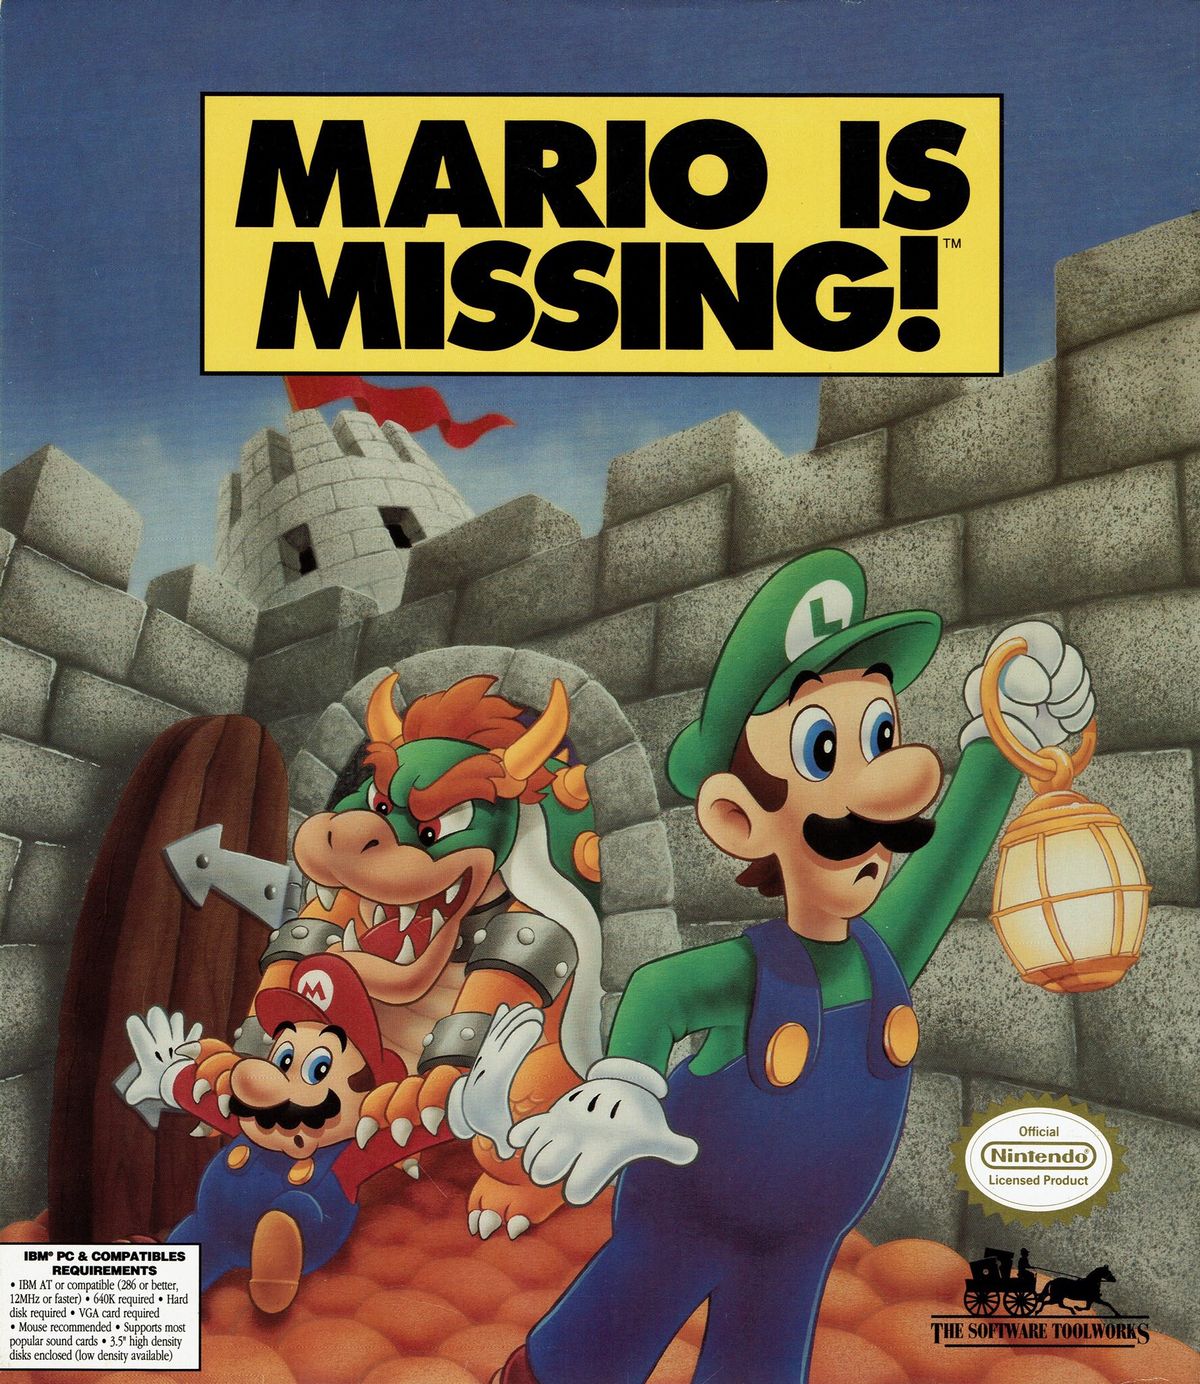 Mario is missing flash game